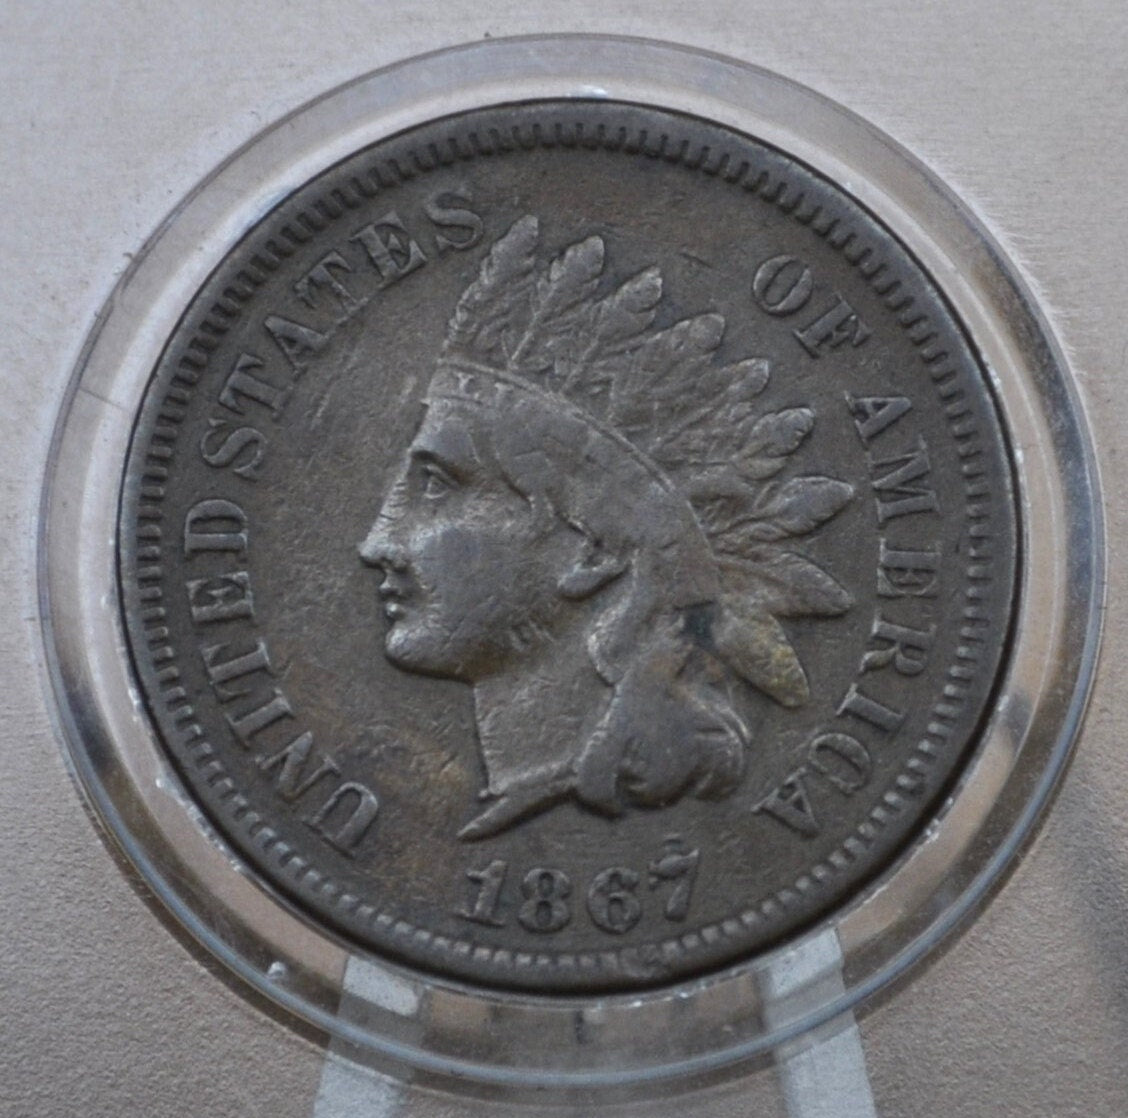 1867 Indian Head Penny - Key Date - Choose by Grade / Condition - Civil War Era Coin - 1867 Cent